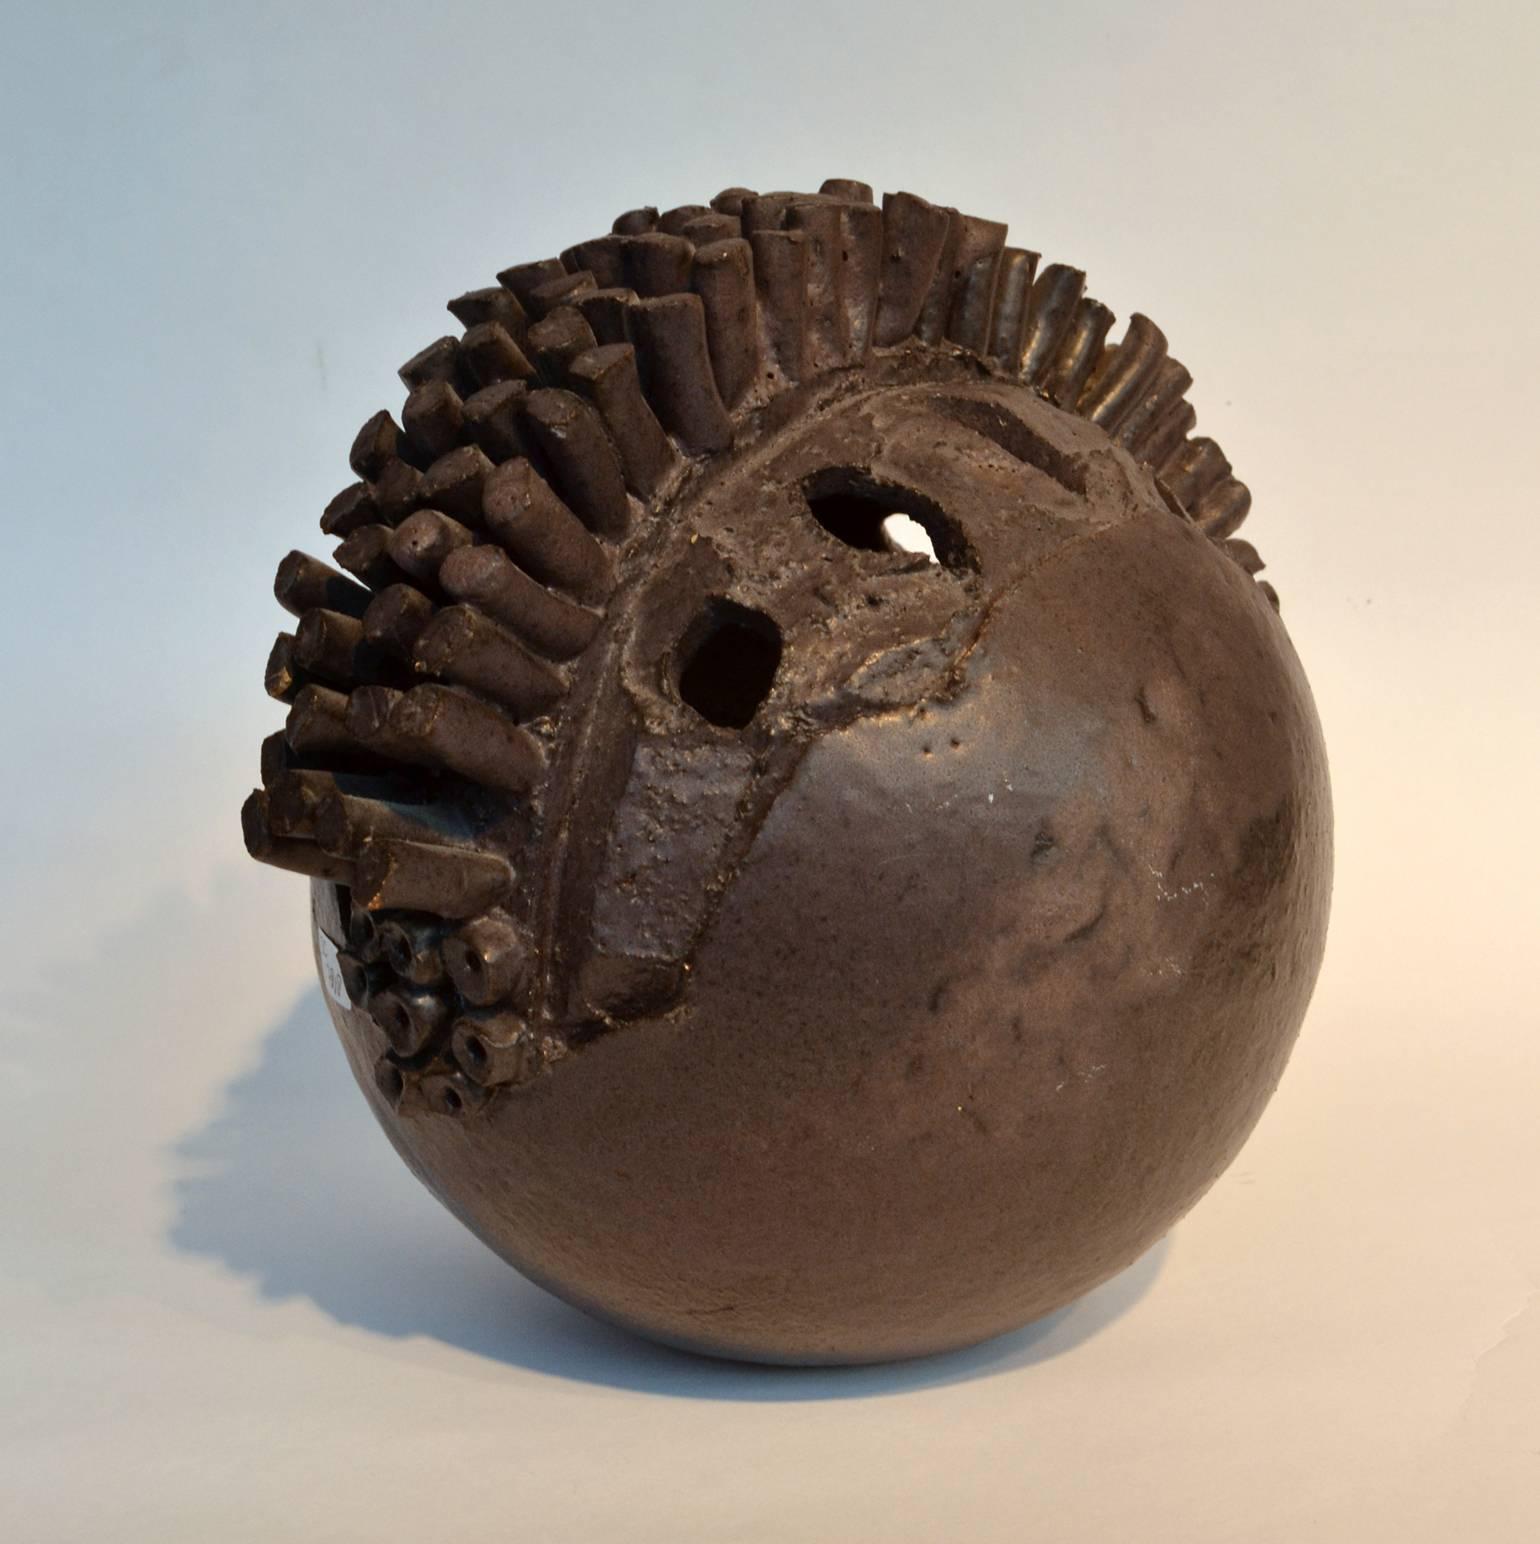 Abstract ceramic sculpture, ball shape with an array of extended forms and perforations, finished with a matt nearly black matt glaze. This unknown German studio potter has signed this piece with 'H'.